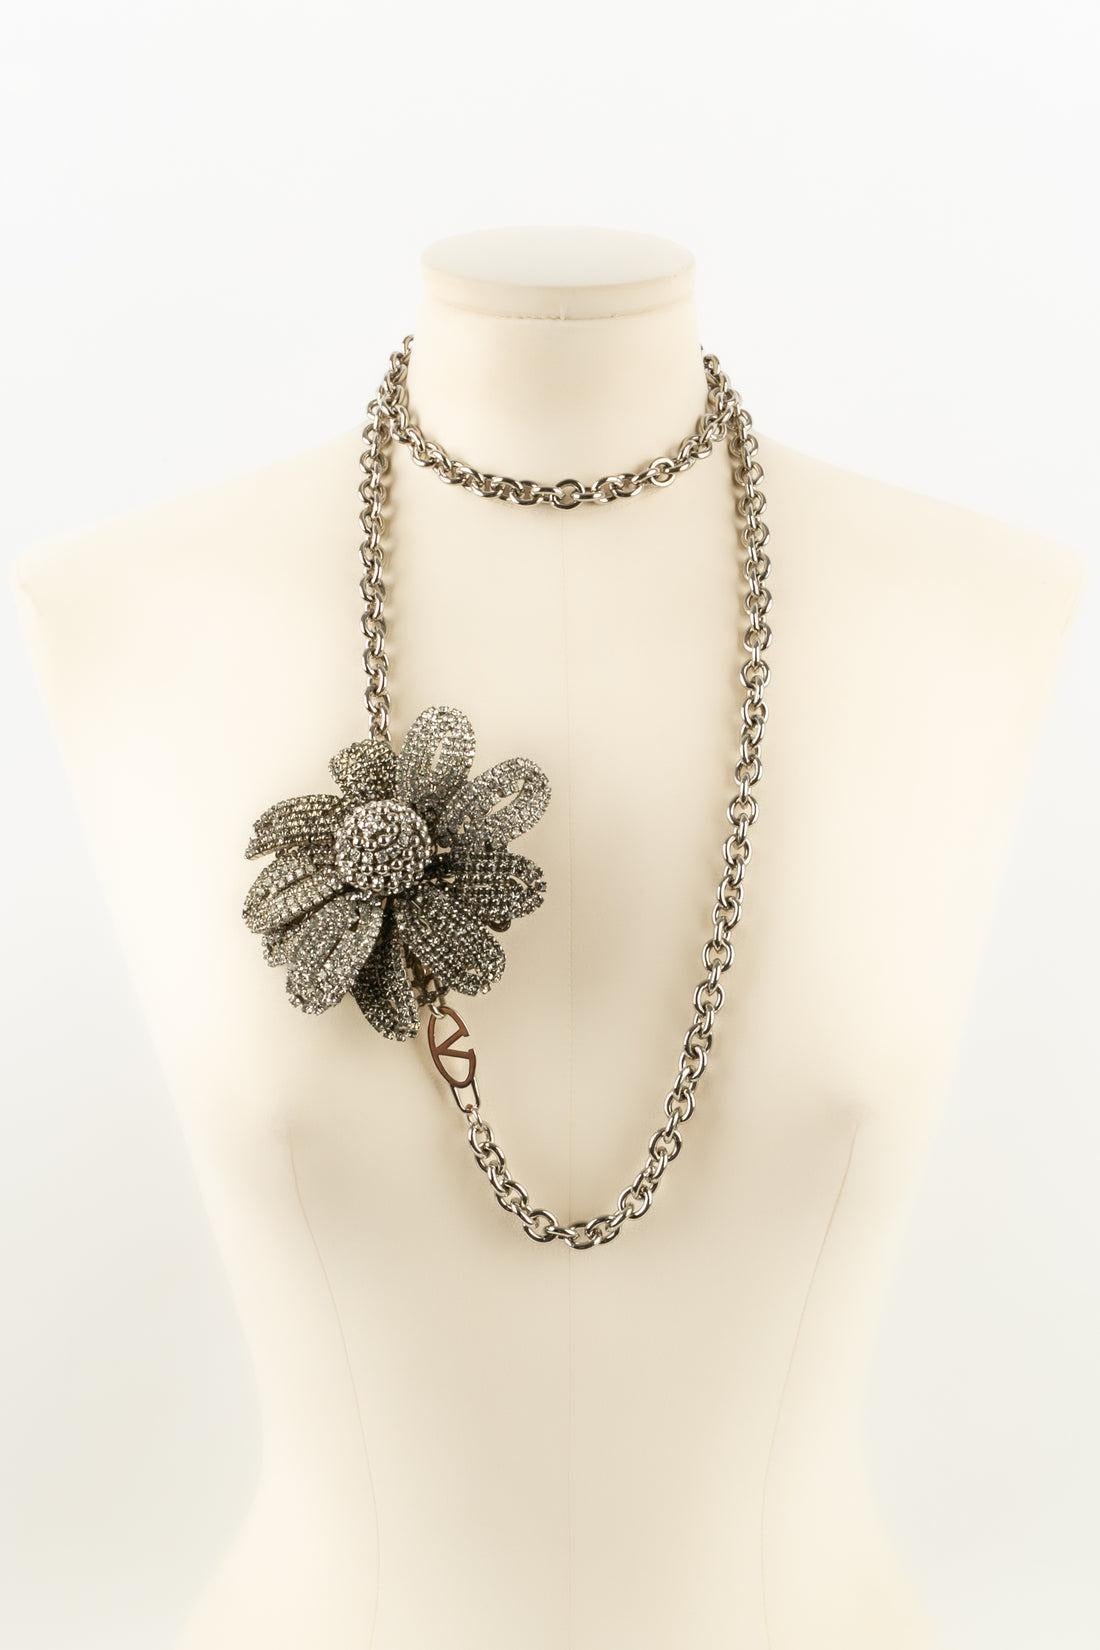 Valentino - Necklace in silver-plated metal and rhinestones.

Additional information:
Condition: Very good condition
Dimensions: Length: 106 cm

Seller Reference: ACC192